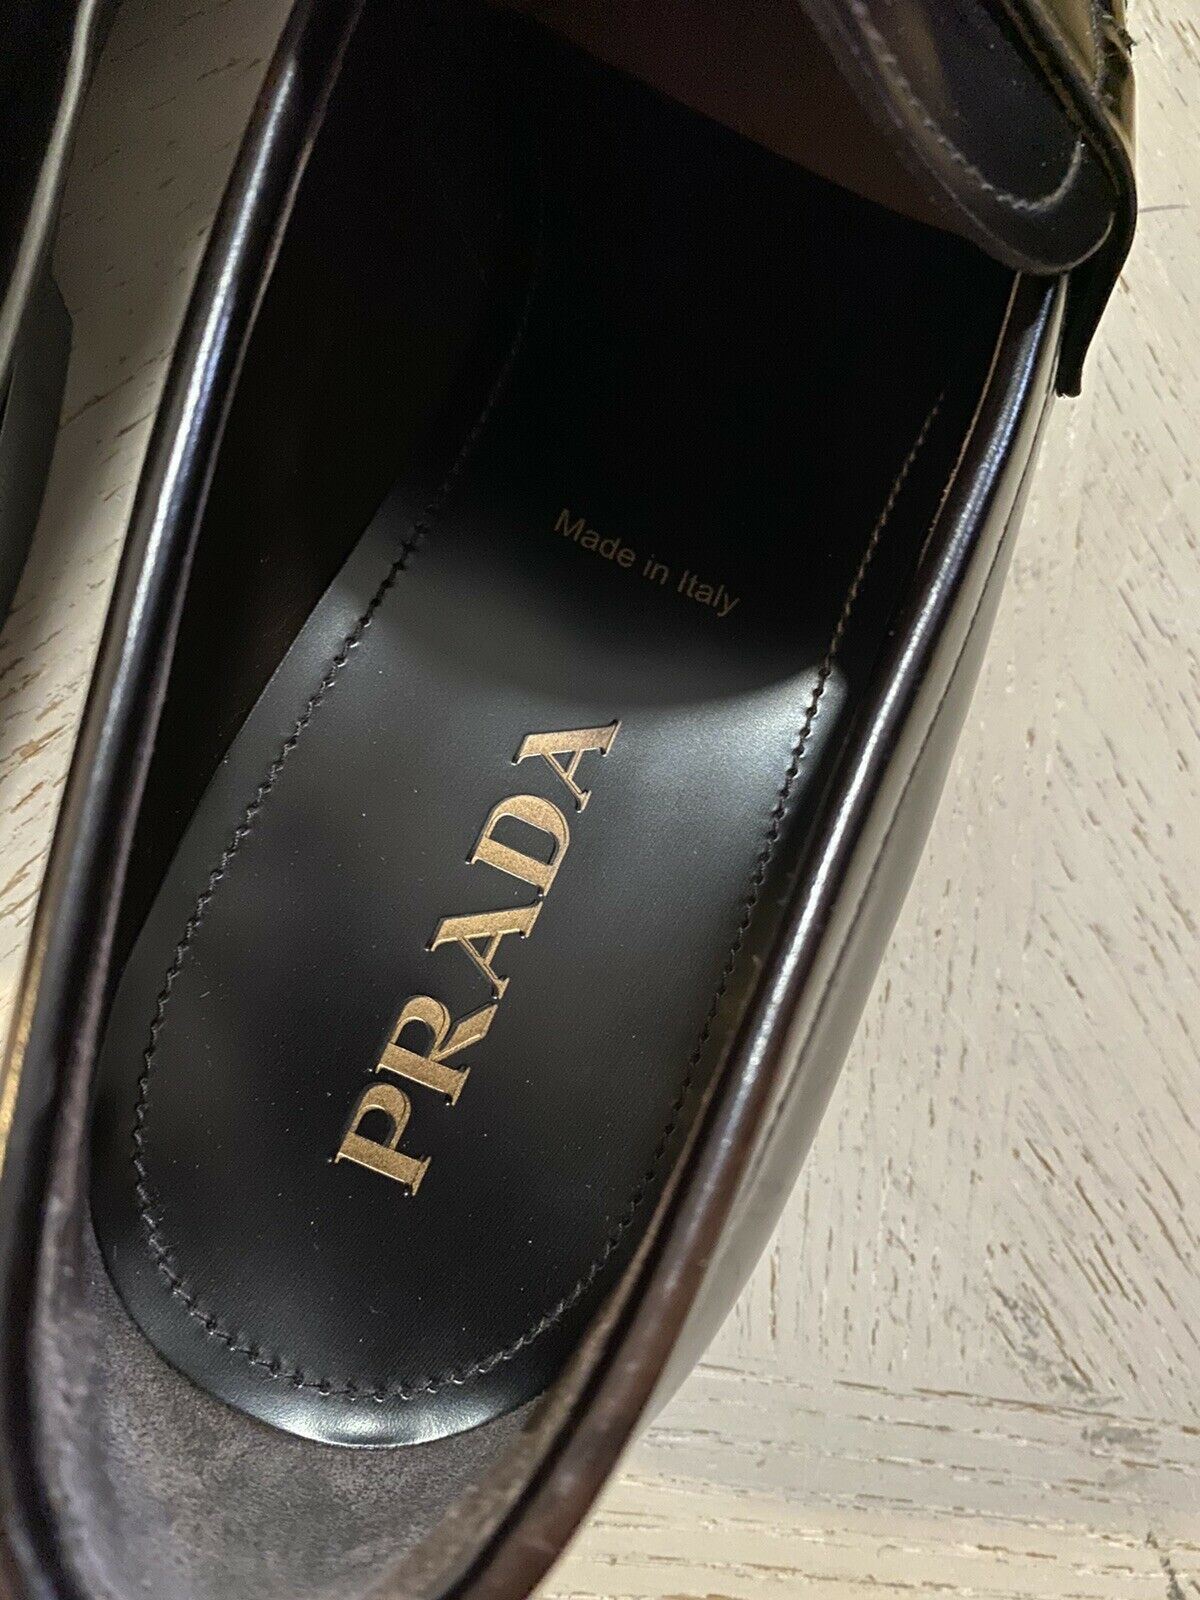 New PRADA Men’s Leather Spazzolato Loafers Shoes Burnt Brown 11.5 US Italy